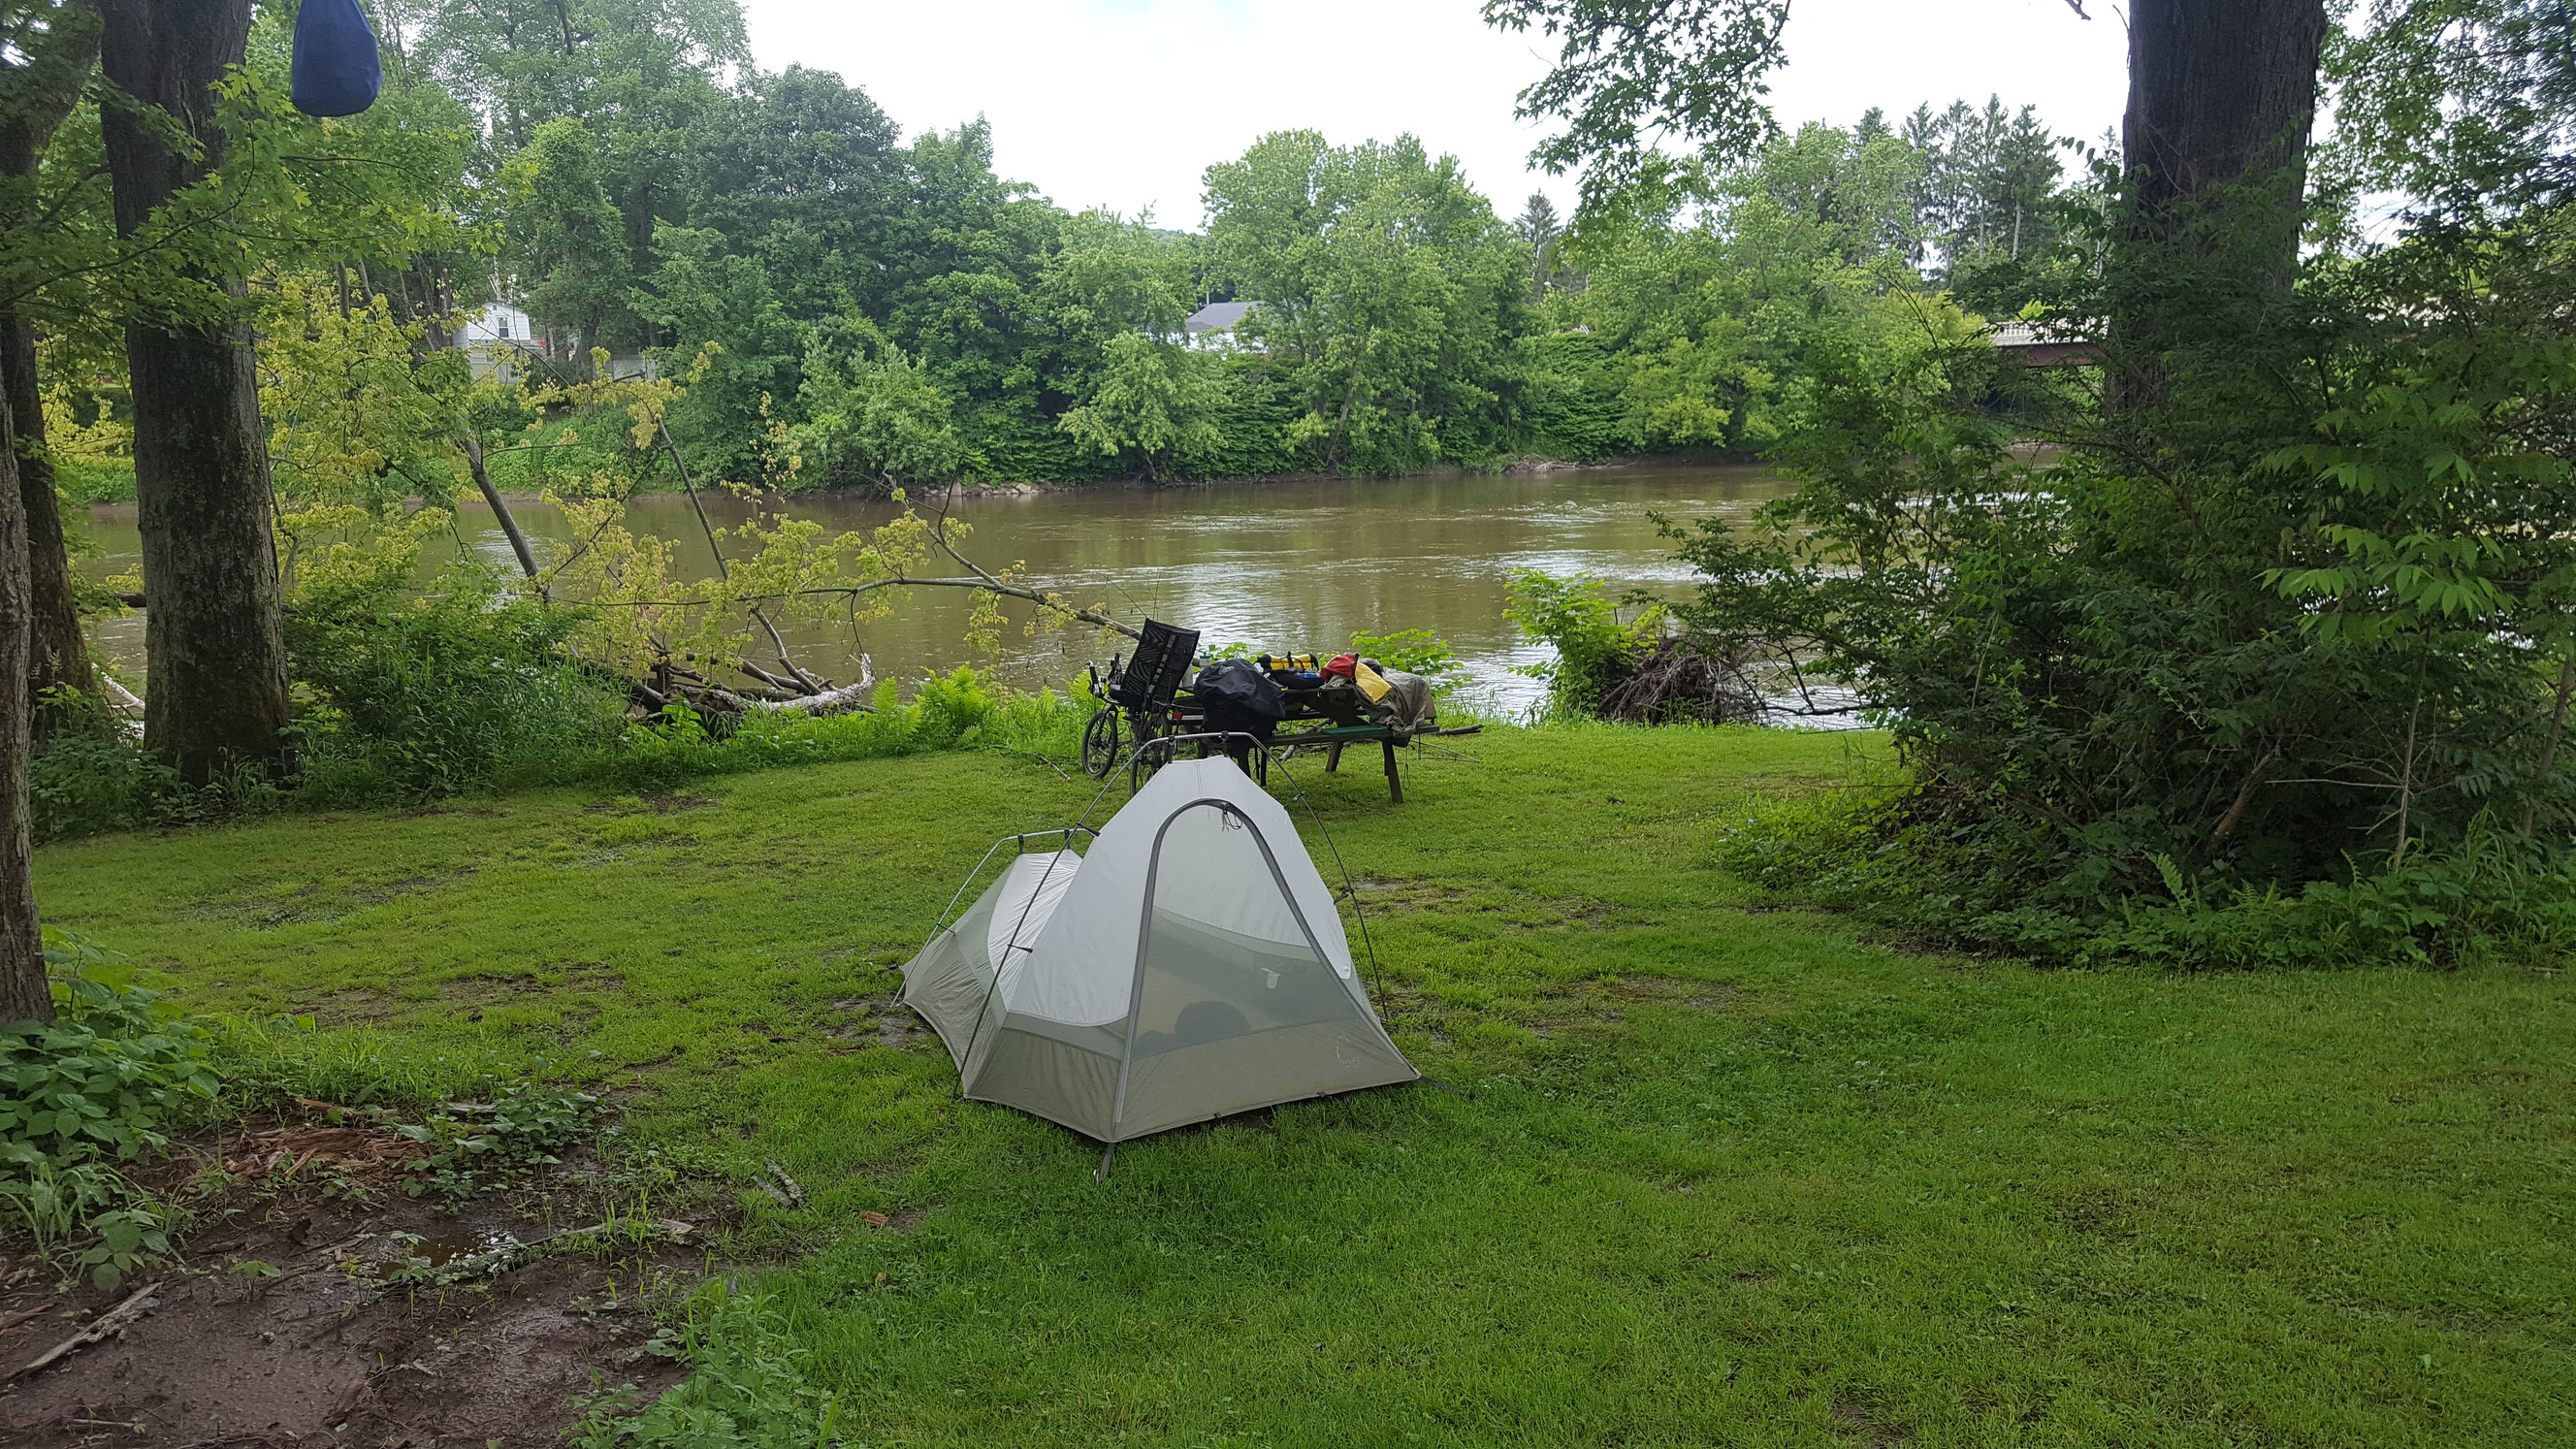 Camping on the bank of the Susquehanna